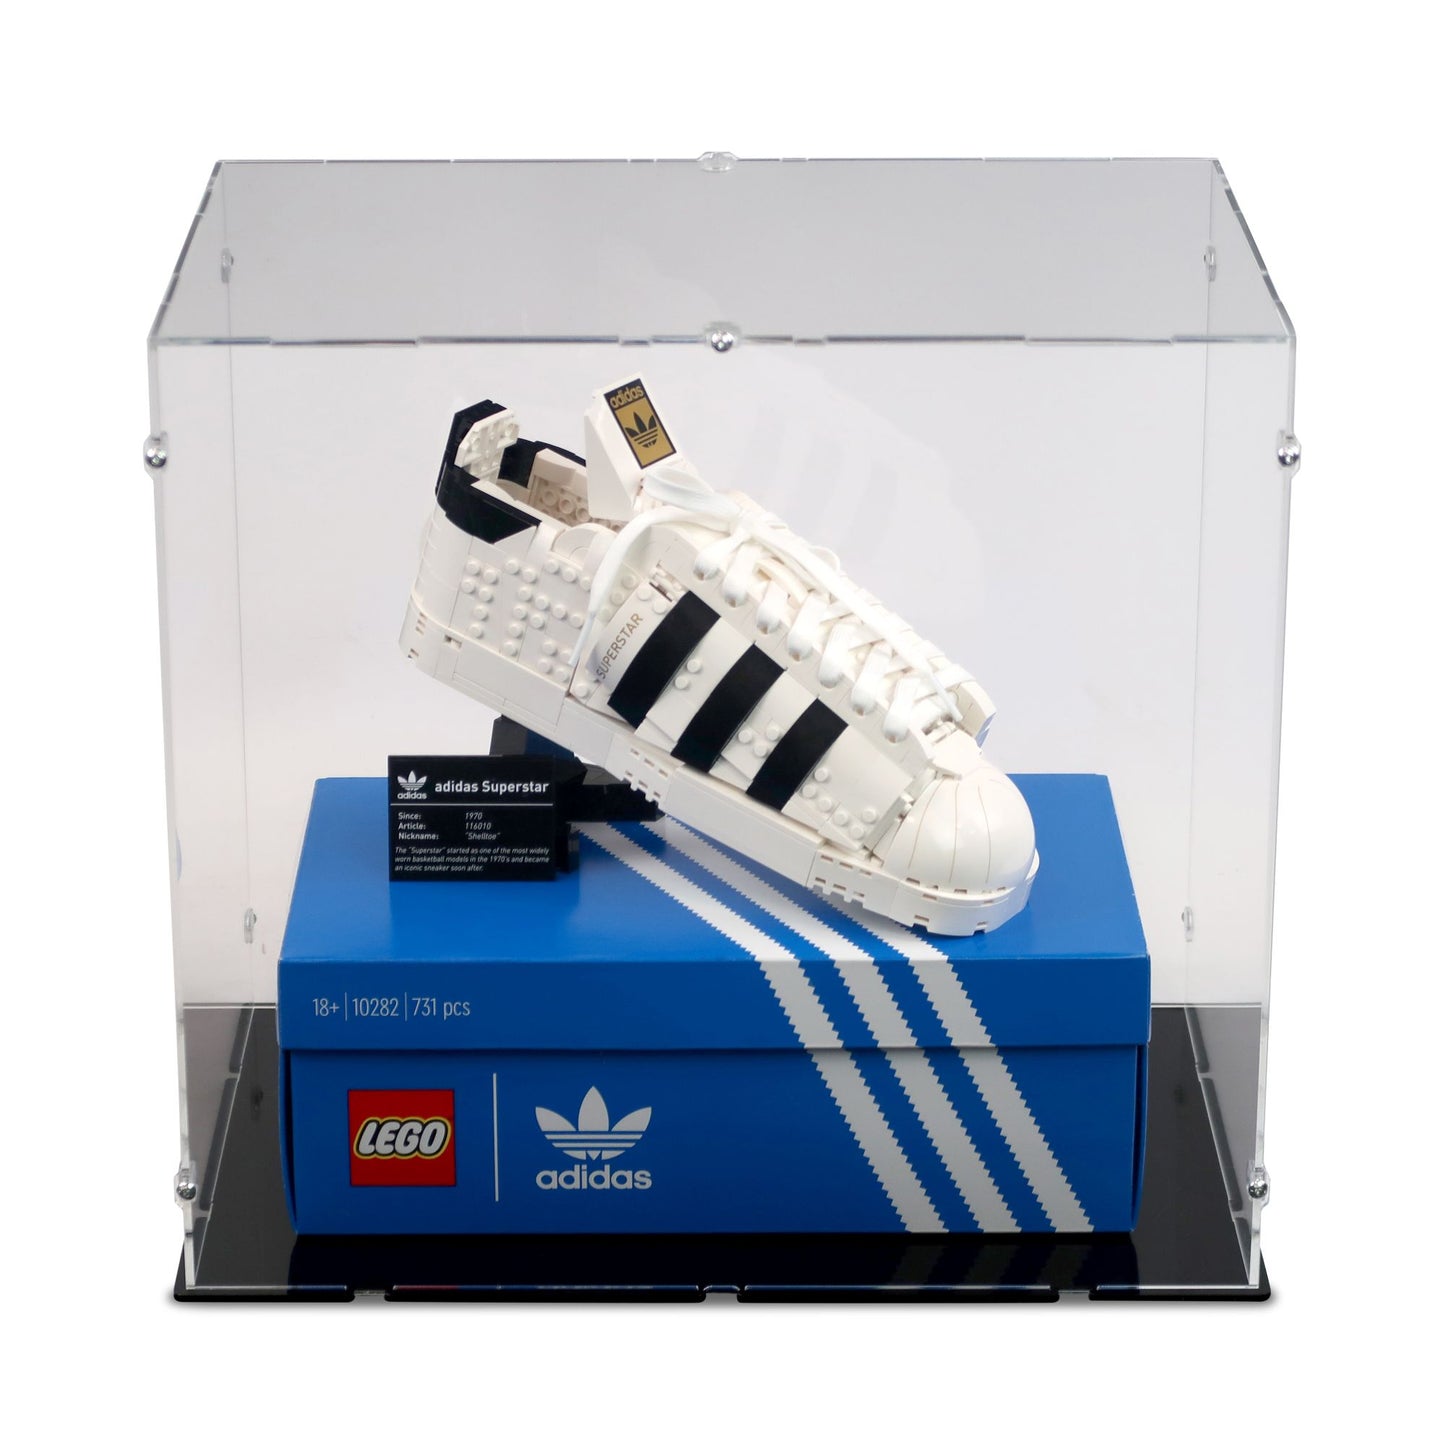 10282 adidas Originals Superstar Display Case (Single or Pair with Box - Tall)